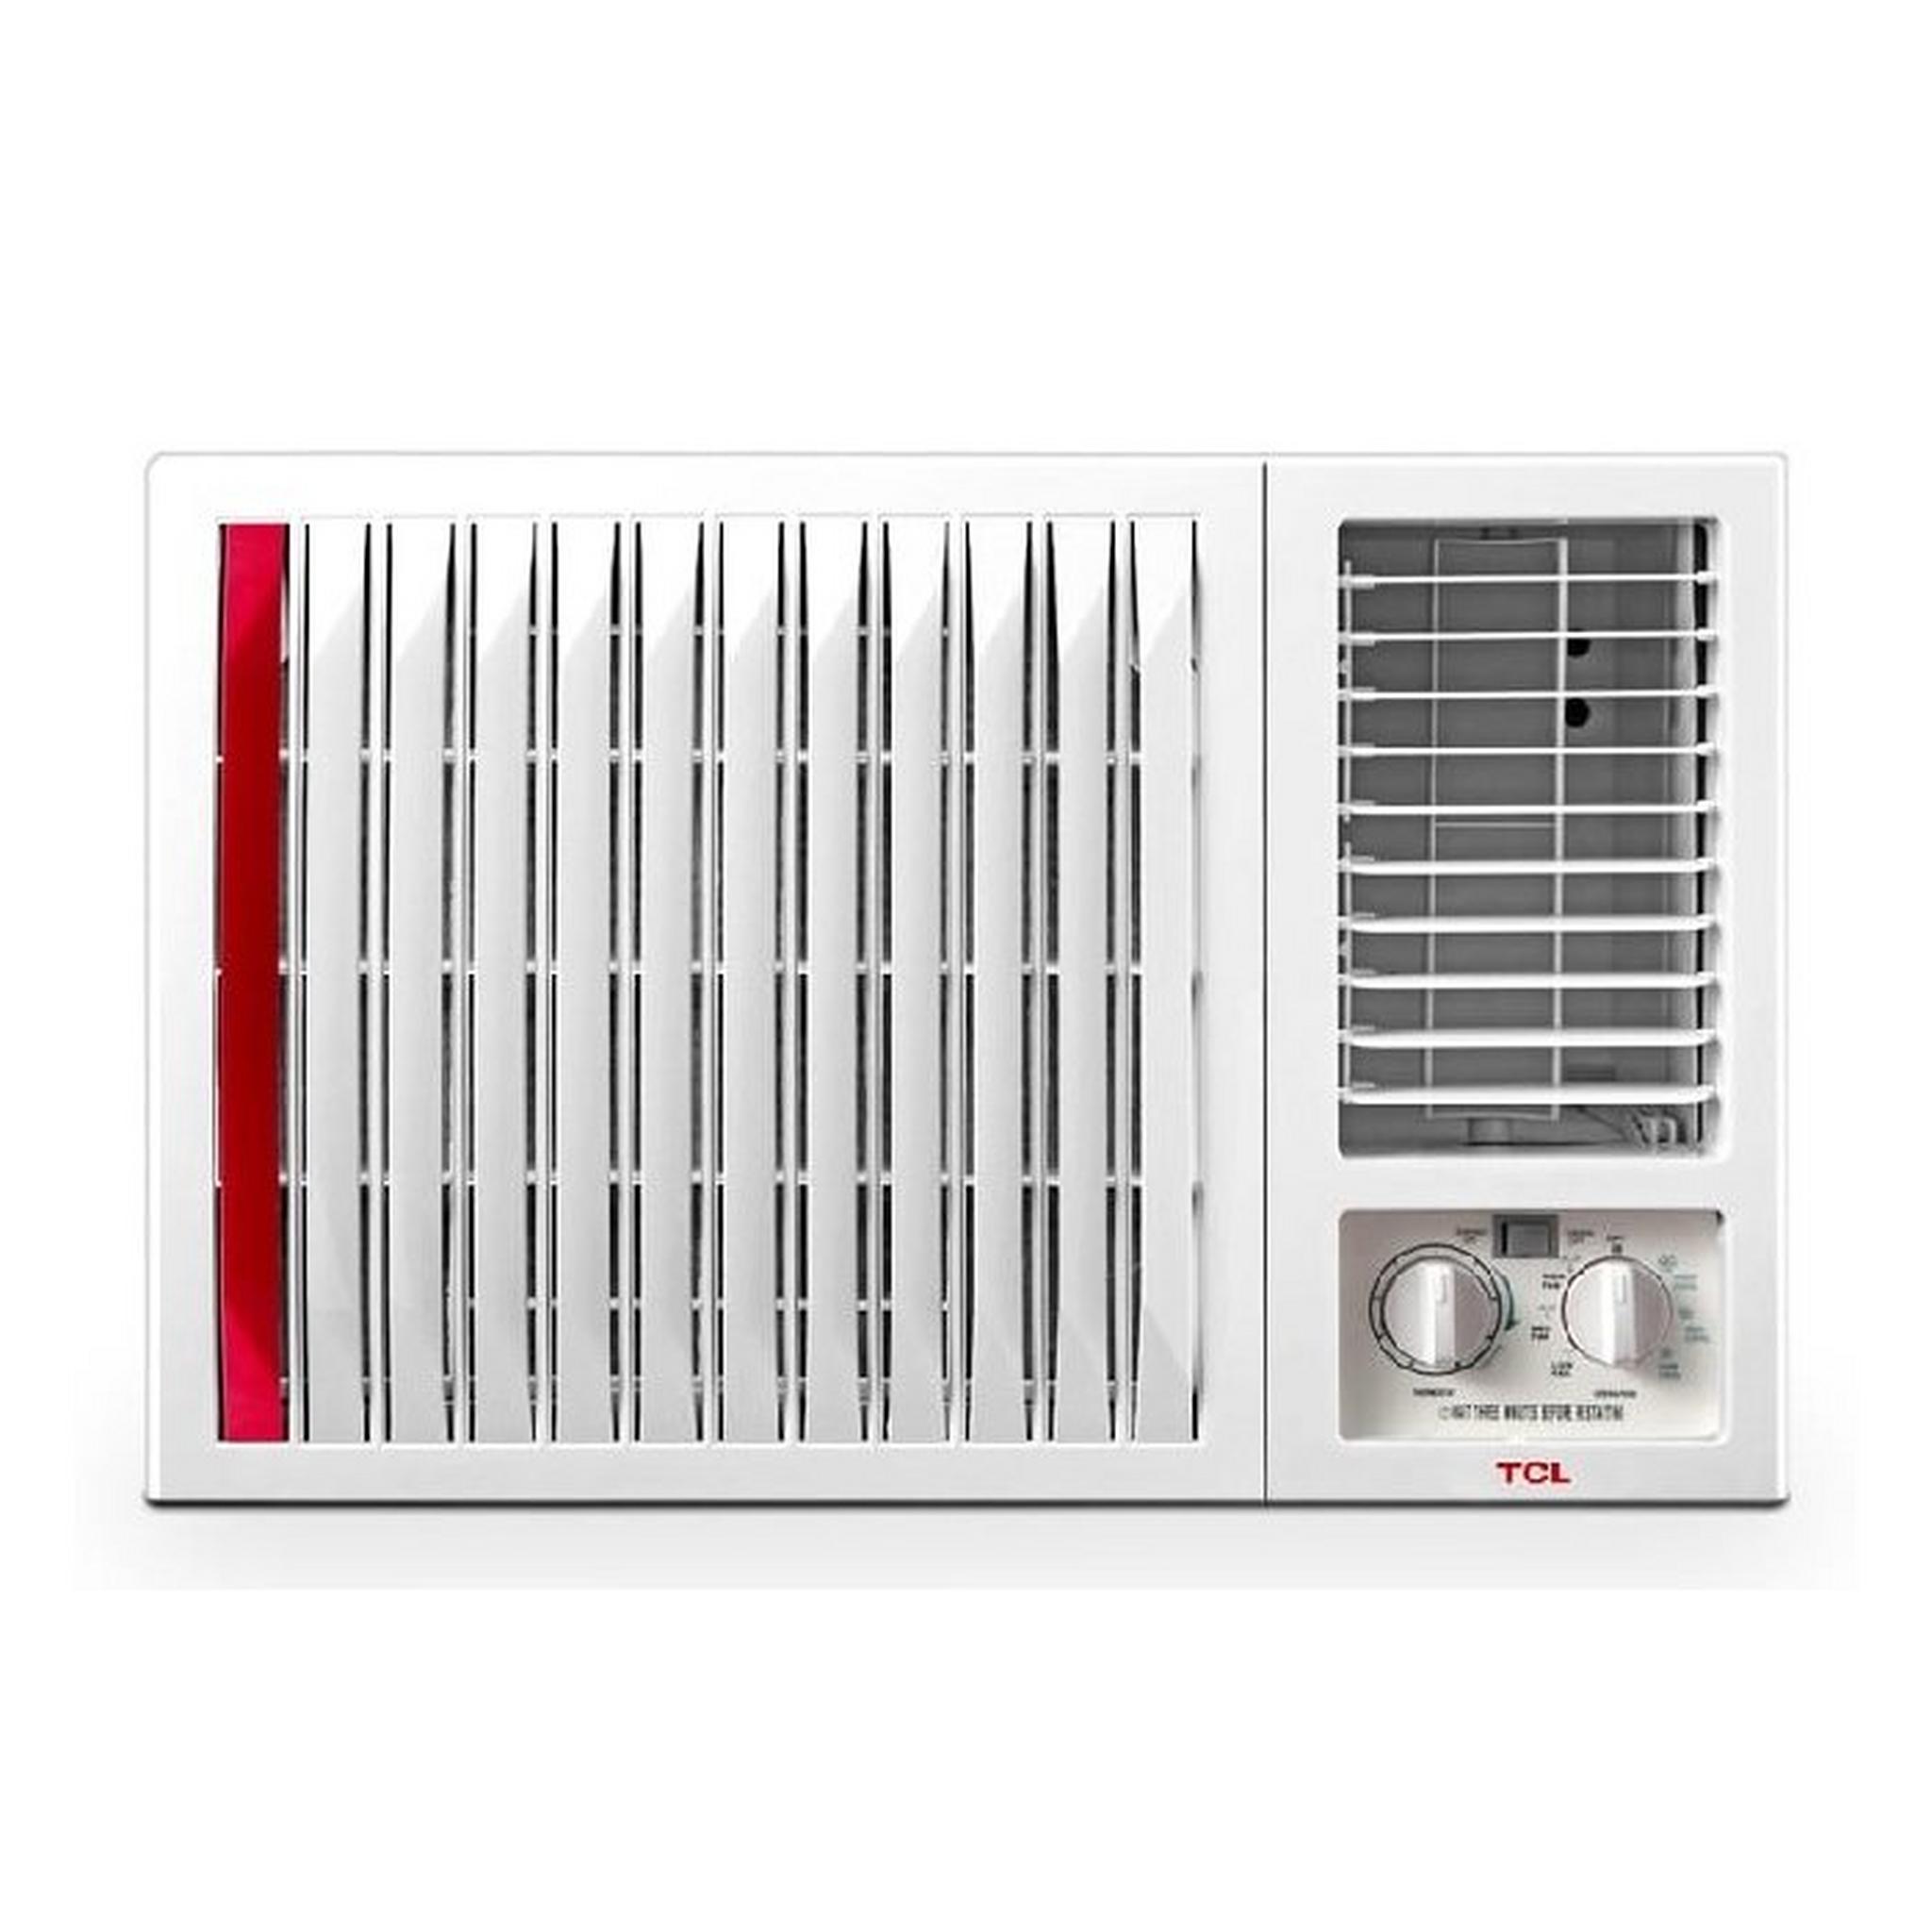 TCL Window Air Conditioner, 13,961 BTU, Cooling only, TAC-18CWA/LT - White